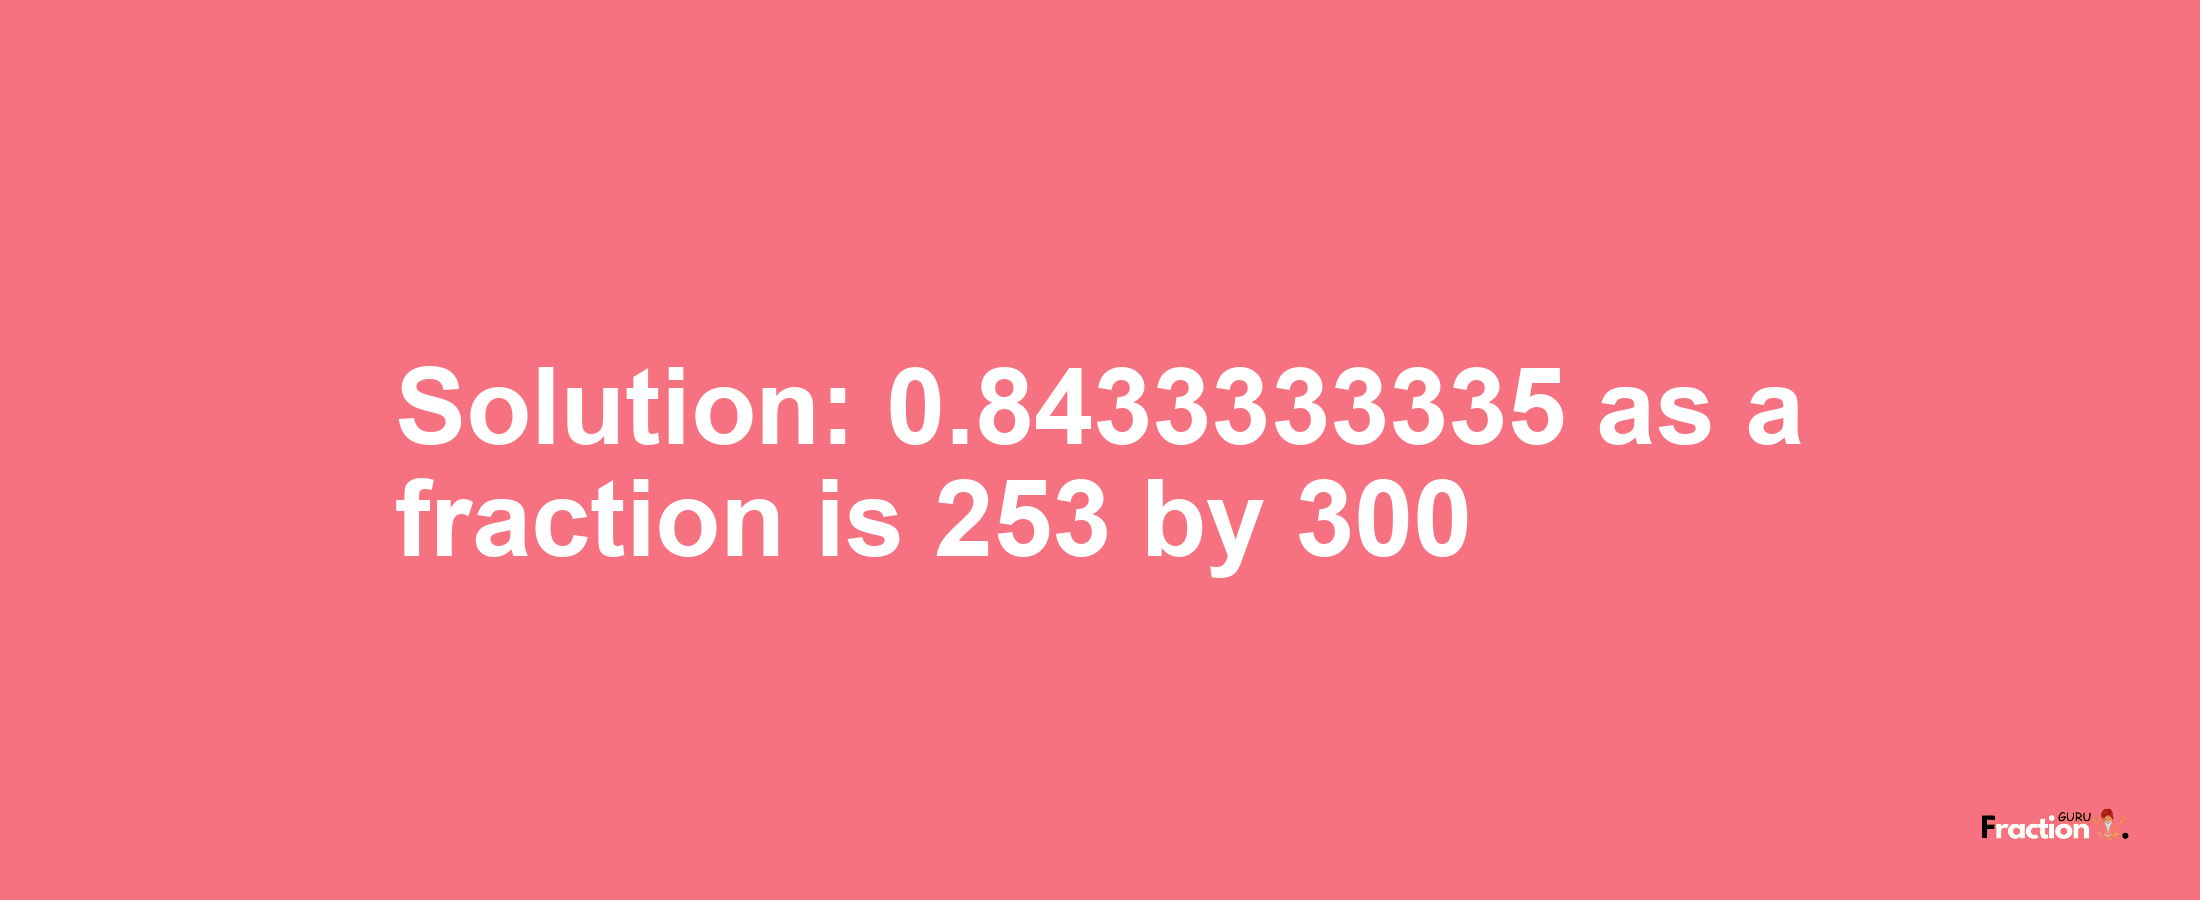 Solution:0.8433333335 as a fraction is 253/300